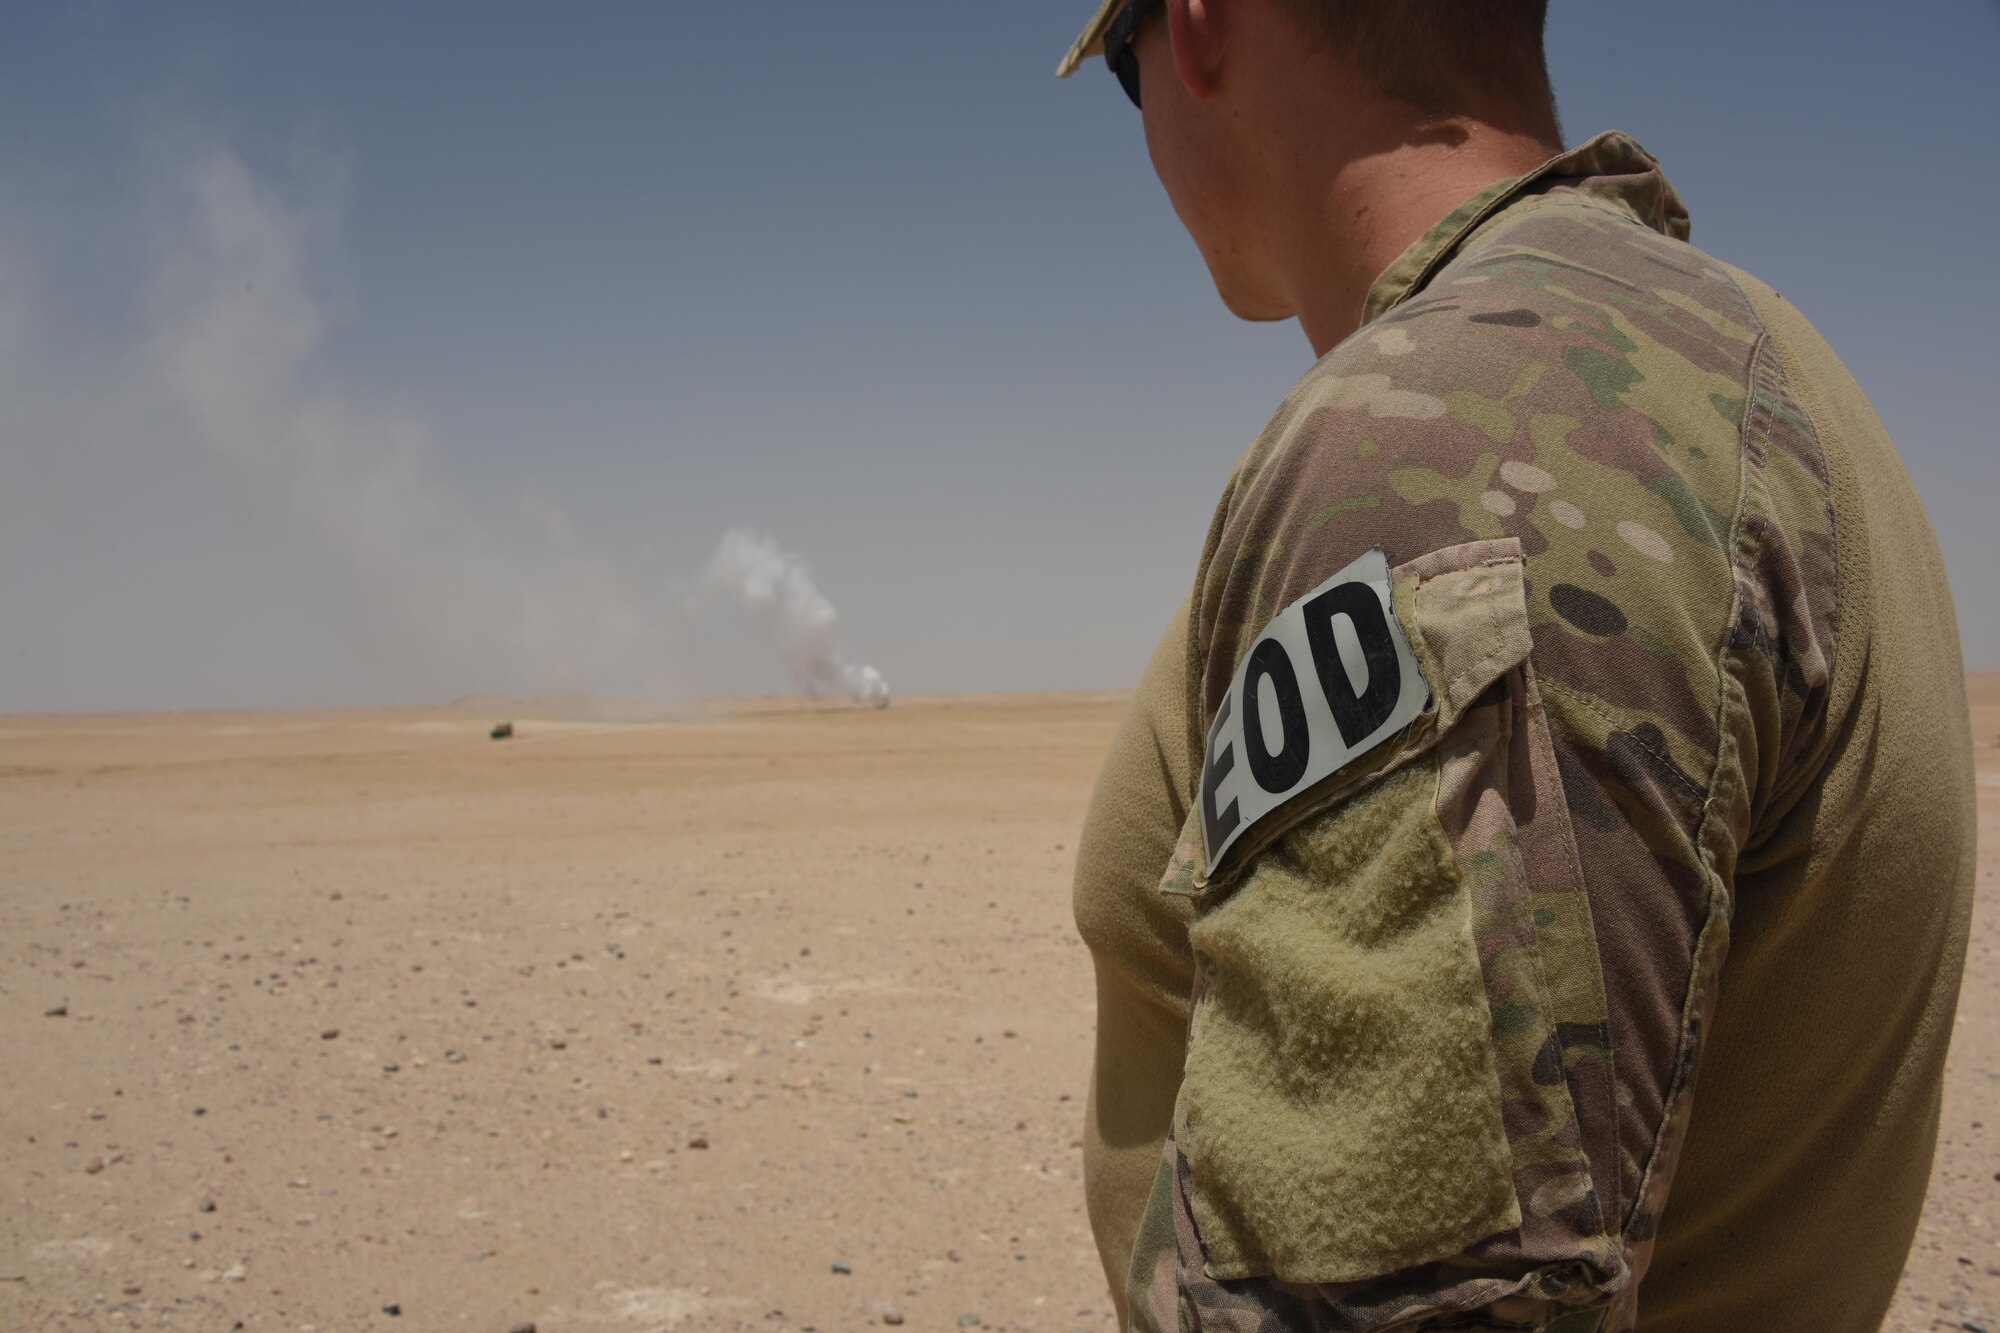 Senior Airman Merit Davey, an Explosive Ordnance Disposal journeyman with the 386th Expeditionary Civil Engineer Squadron, watches a stockpile of munitions burn from a safe distance during an ammunition disposal request burn operation at an undisclosed location in Southwest Asia, May 11, 2017. A group of EOD technicians, ammunition personnel and firefighters from the 386th Air Expeditionary Wing worked together to dispose of a truckload of expired ordnances in a safe manner at an isolated location. (U.S. Air Force photo/ Tech. Sgt. Jonathan Hehnly)